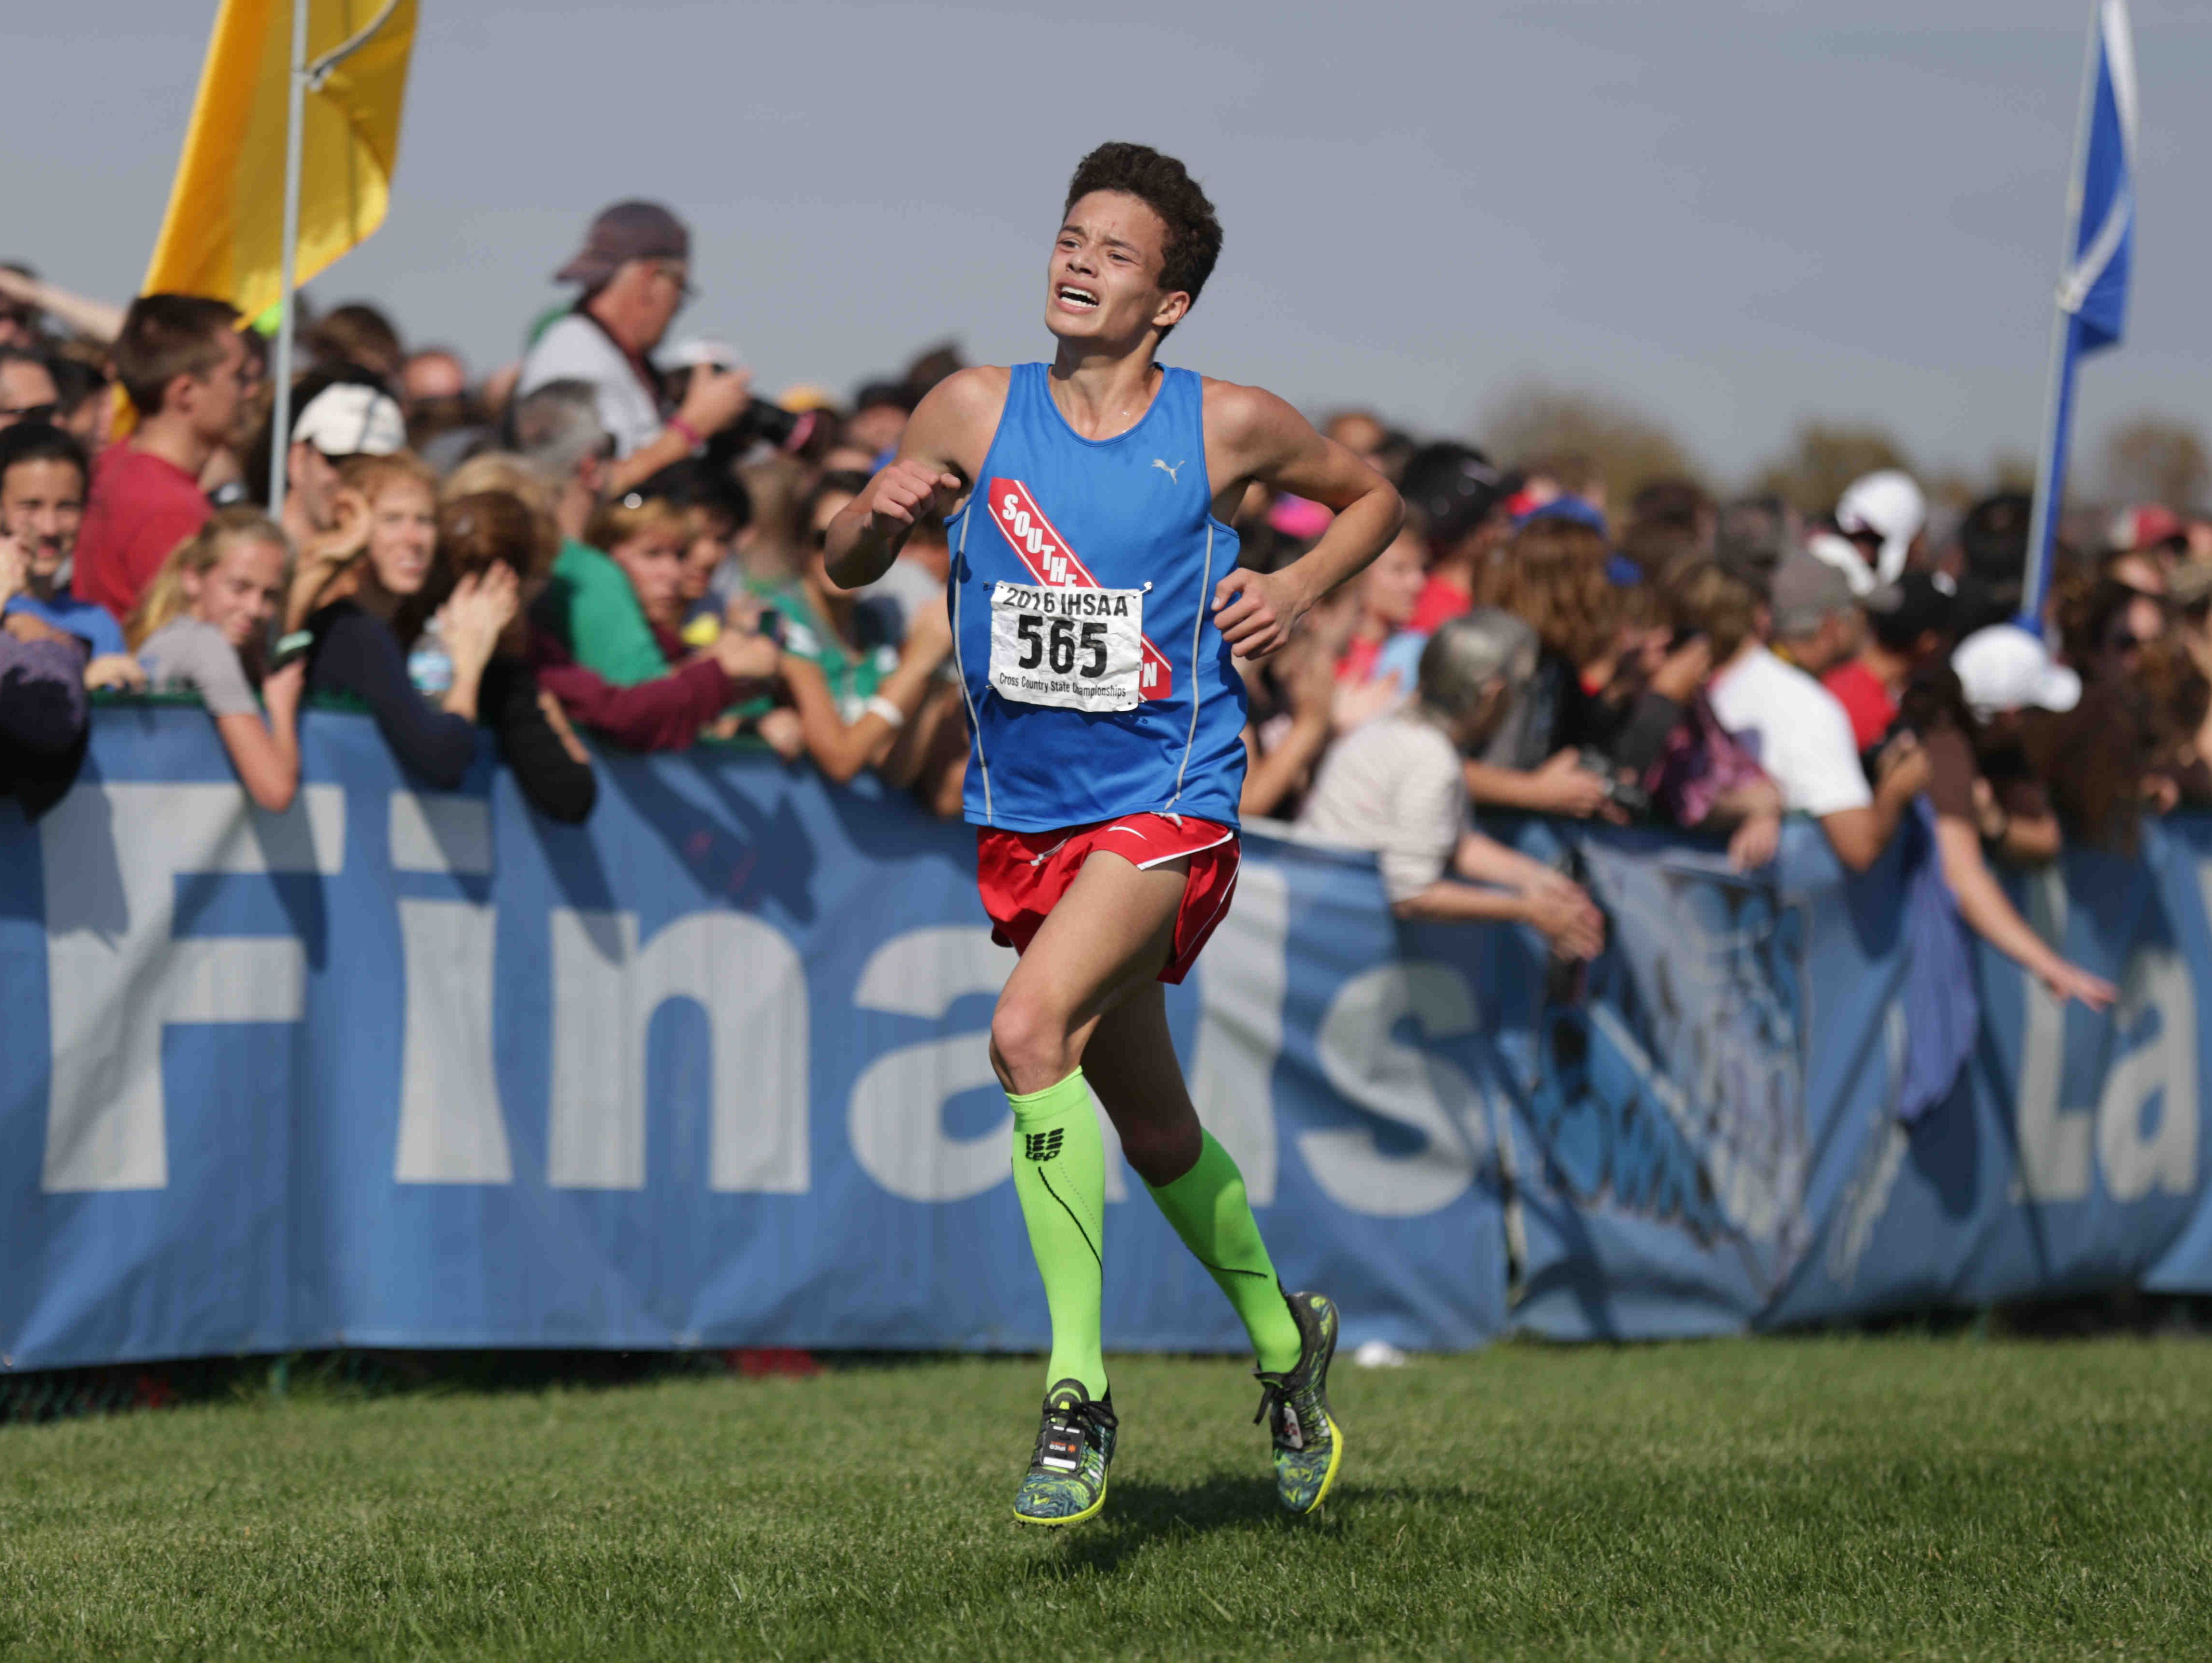 Hamilton Southeastern junior Gabe Fendel, who finished second overall, heads toward the finish line during the IHSAA cross country state finals in Terre Haute.